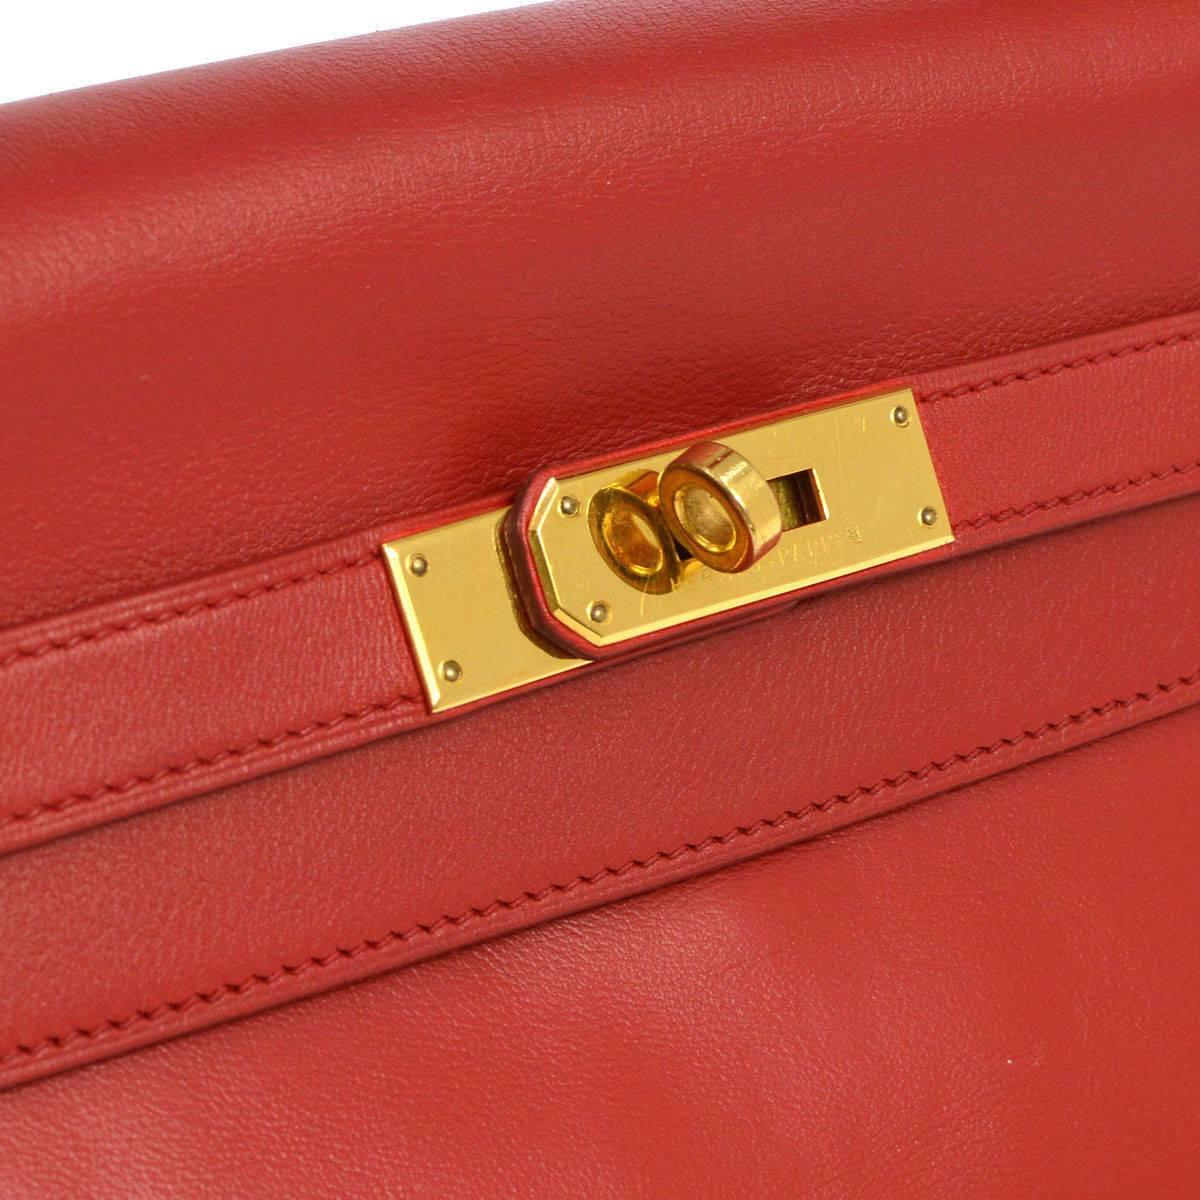 Hermes Kelly 32 Rouge Red Leather Evening Top Handle Satchel Flap Bag in Box 

Box calf leather
Gold tone hardware
Leather lining
Date code Circle Z
Made in France
Handle drop 5"
Removable shoulder strap drop 18"
Measures 12.5" W x